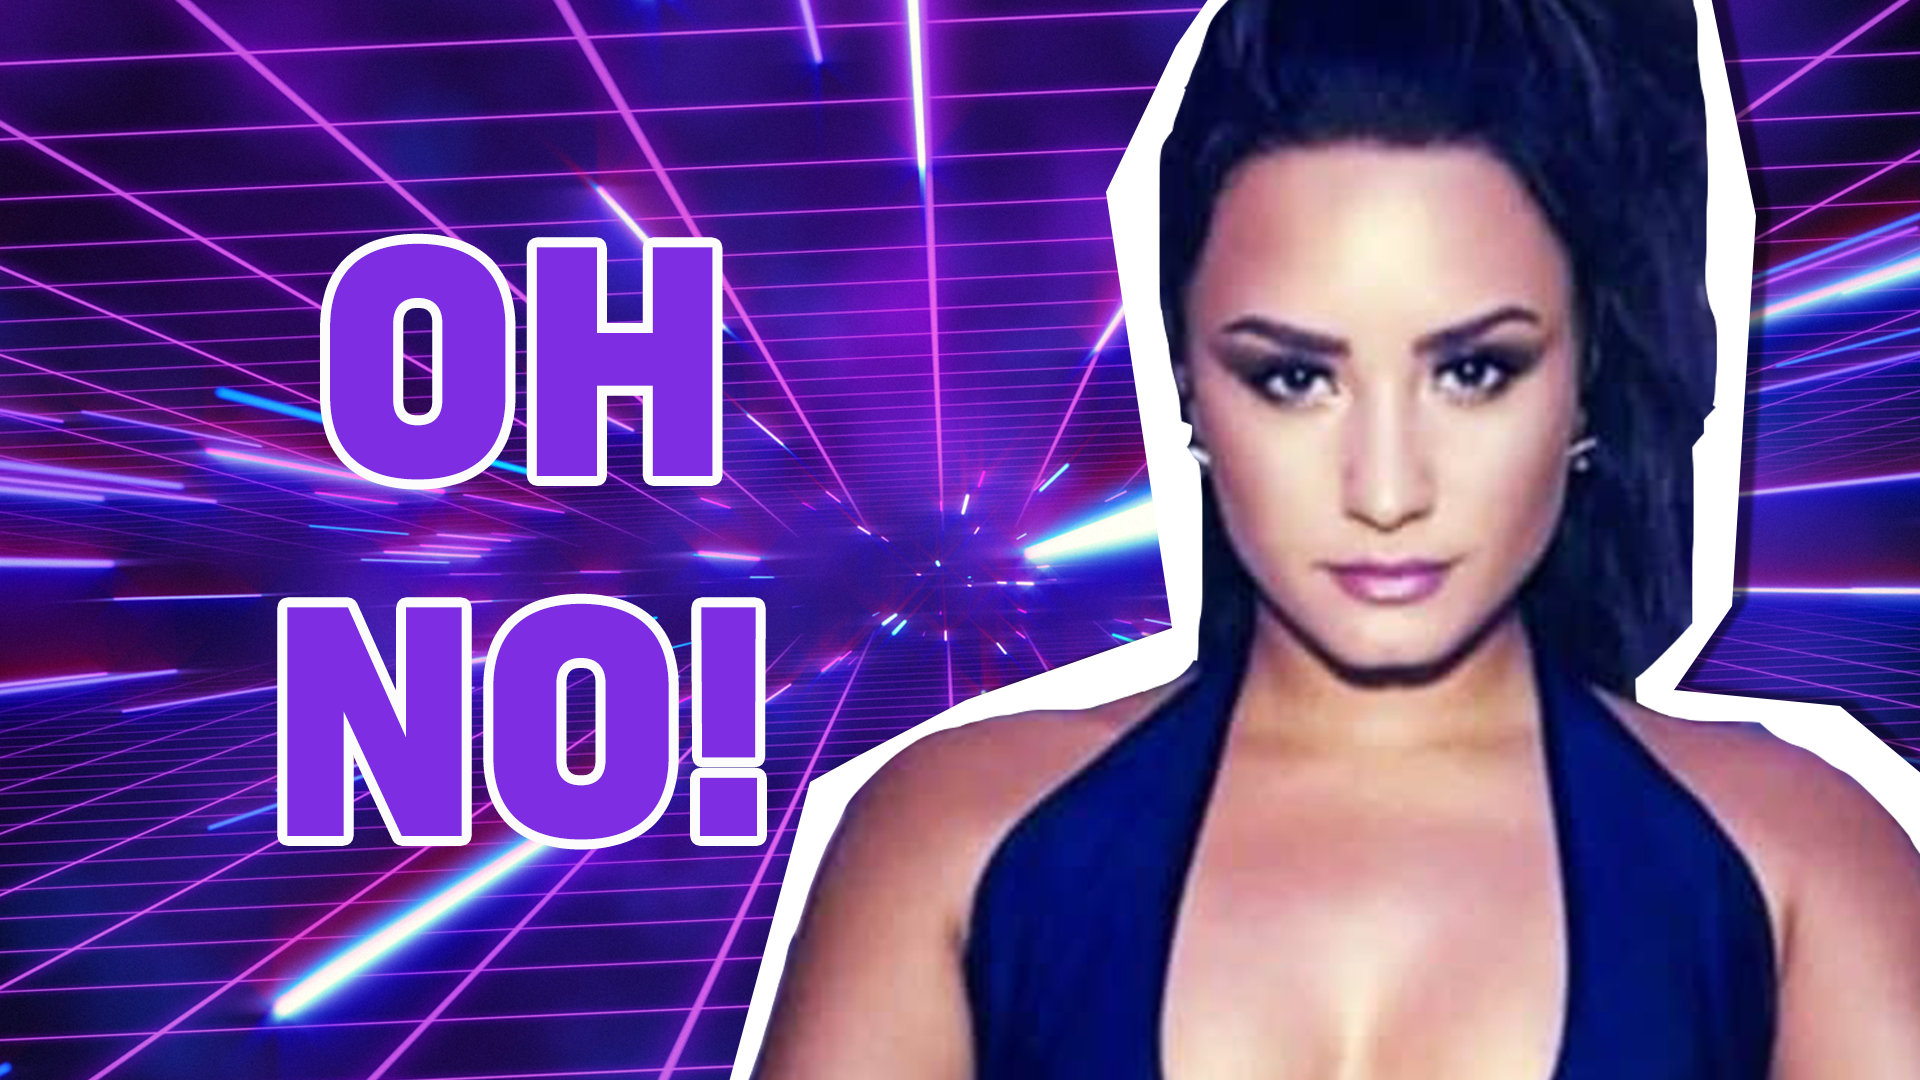 Bad luck! You didn't get any answers right in this Demi lyric quiz! Better luck next time!